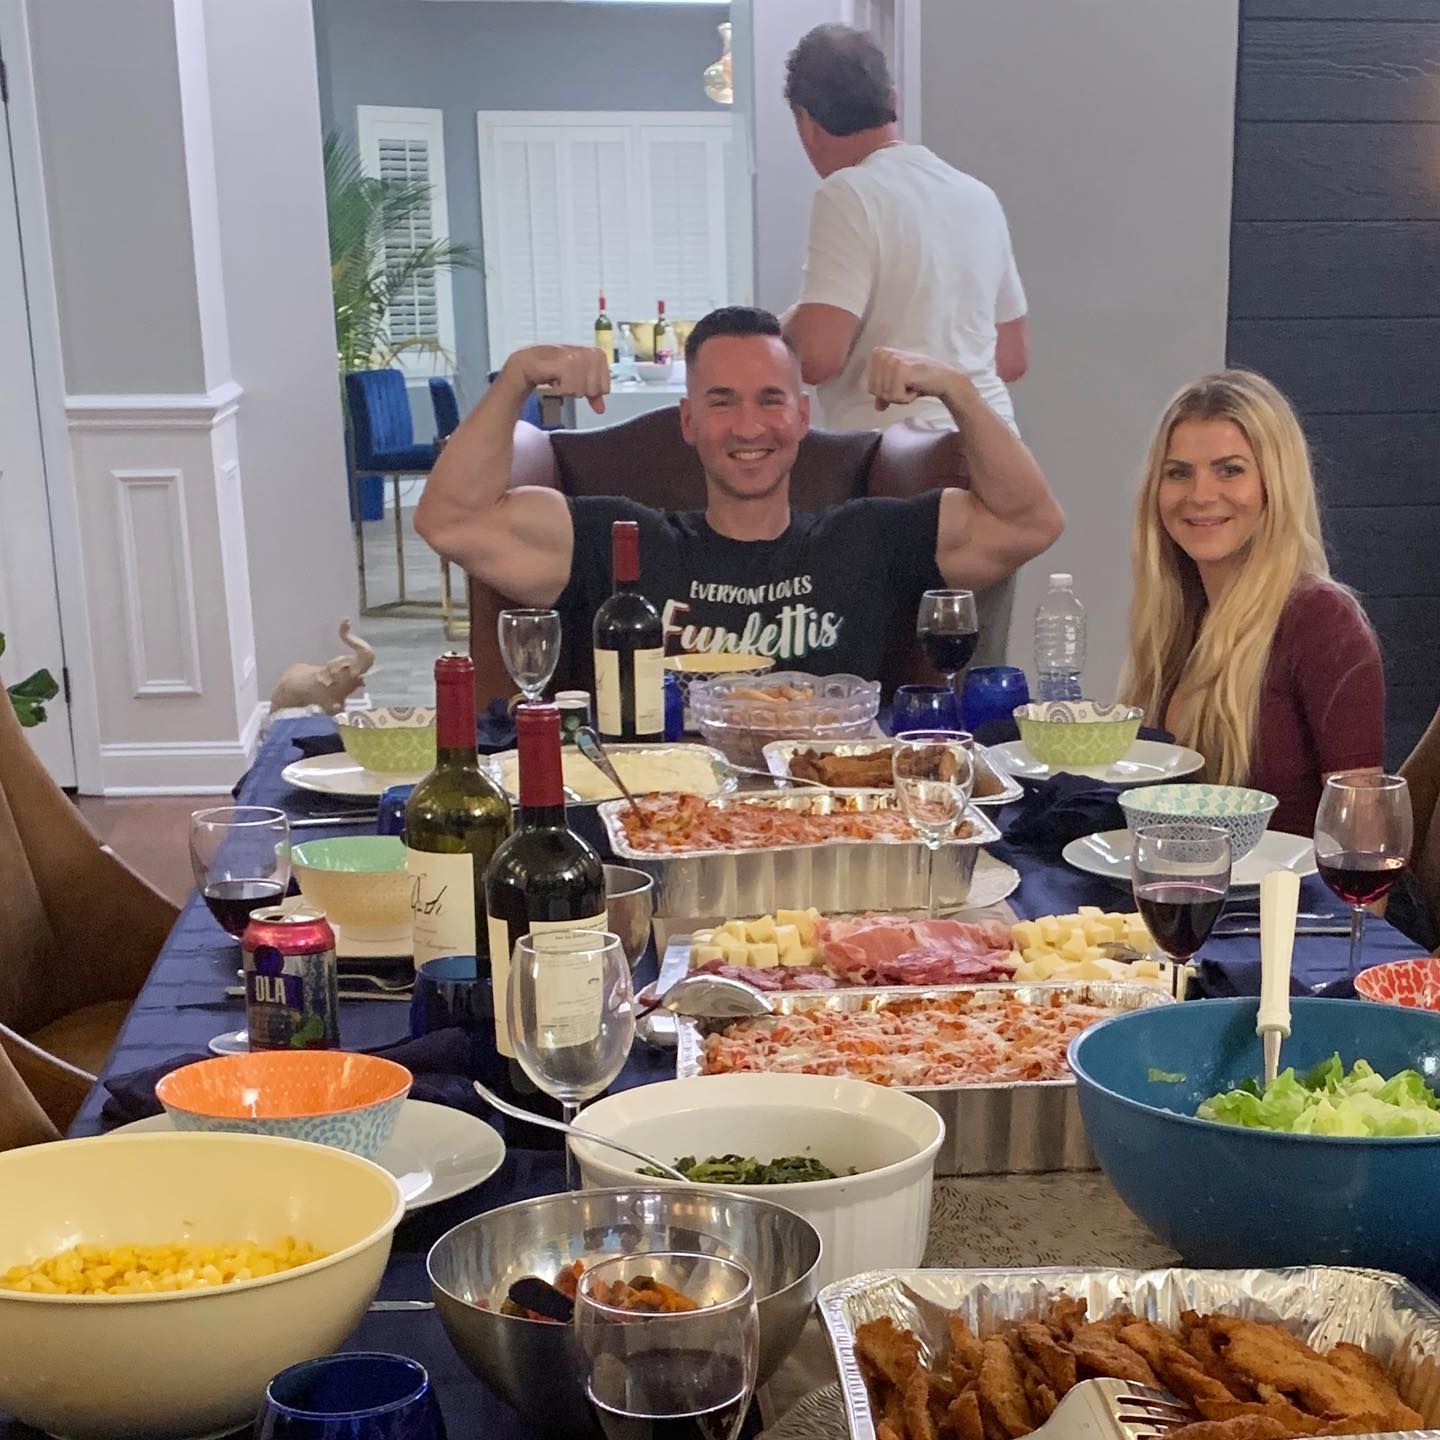 Bank zoete smaak Ik geloof Jersey Shore's The Situation Shared A Photo Of A Massive Dinner Post Prison